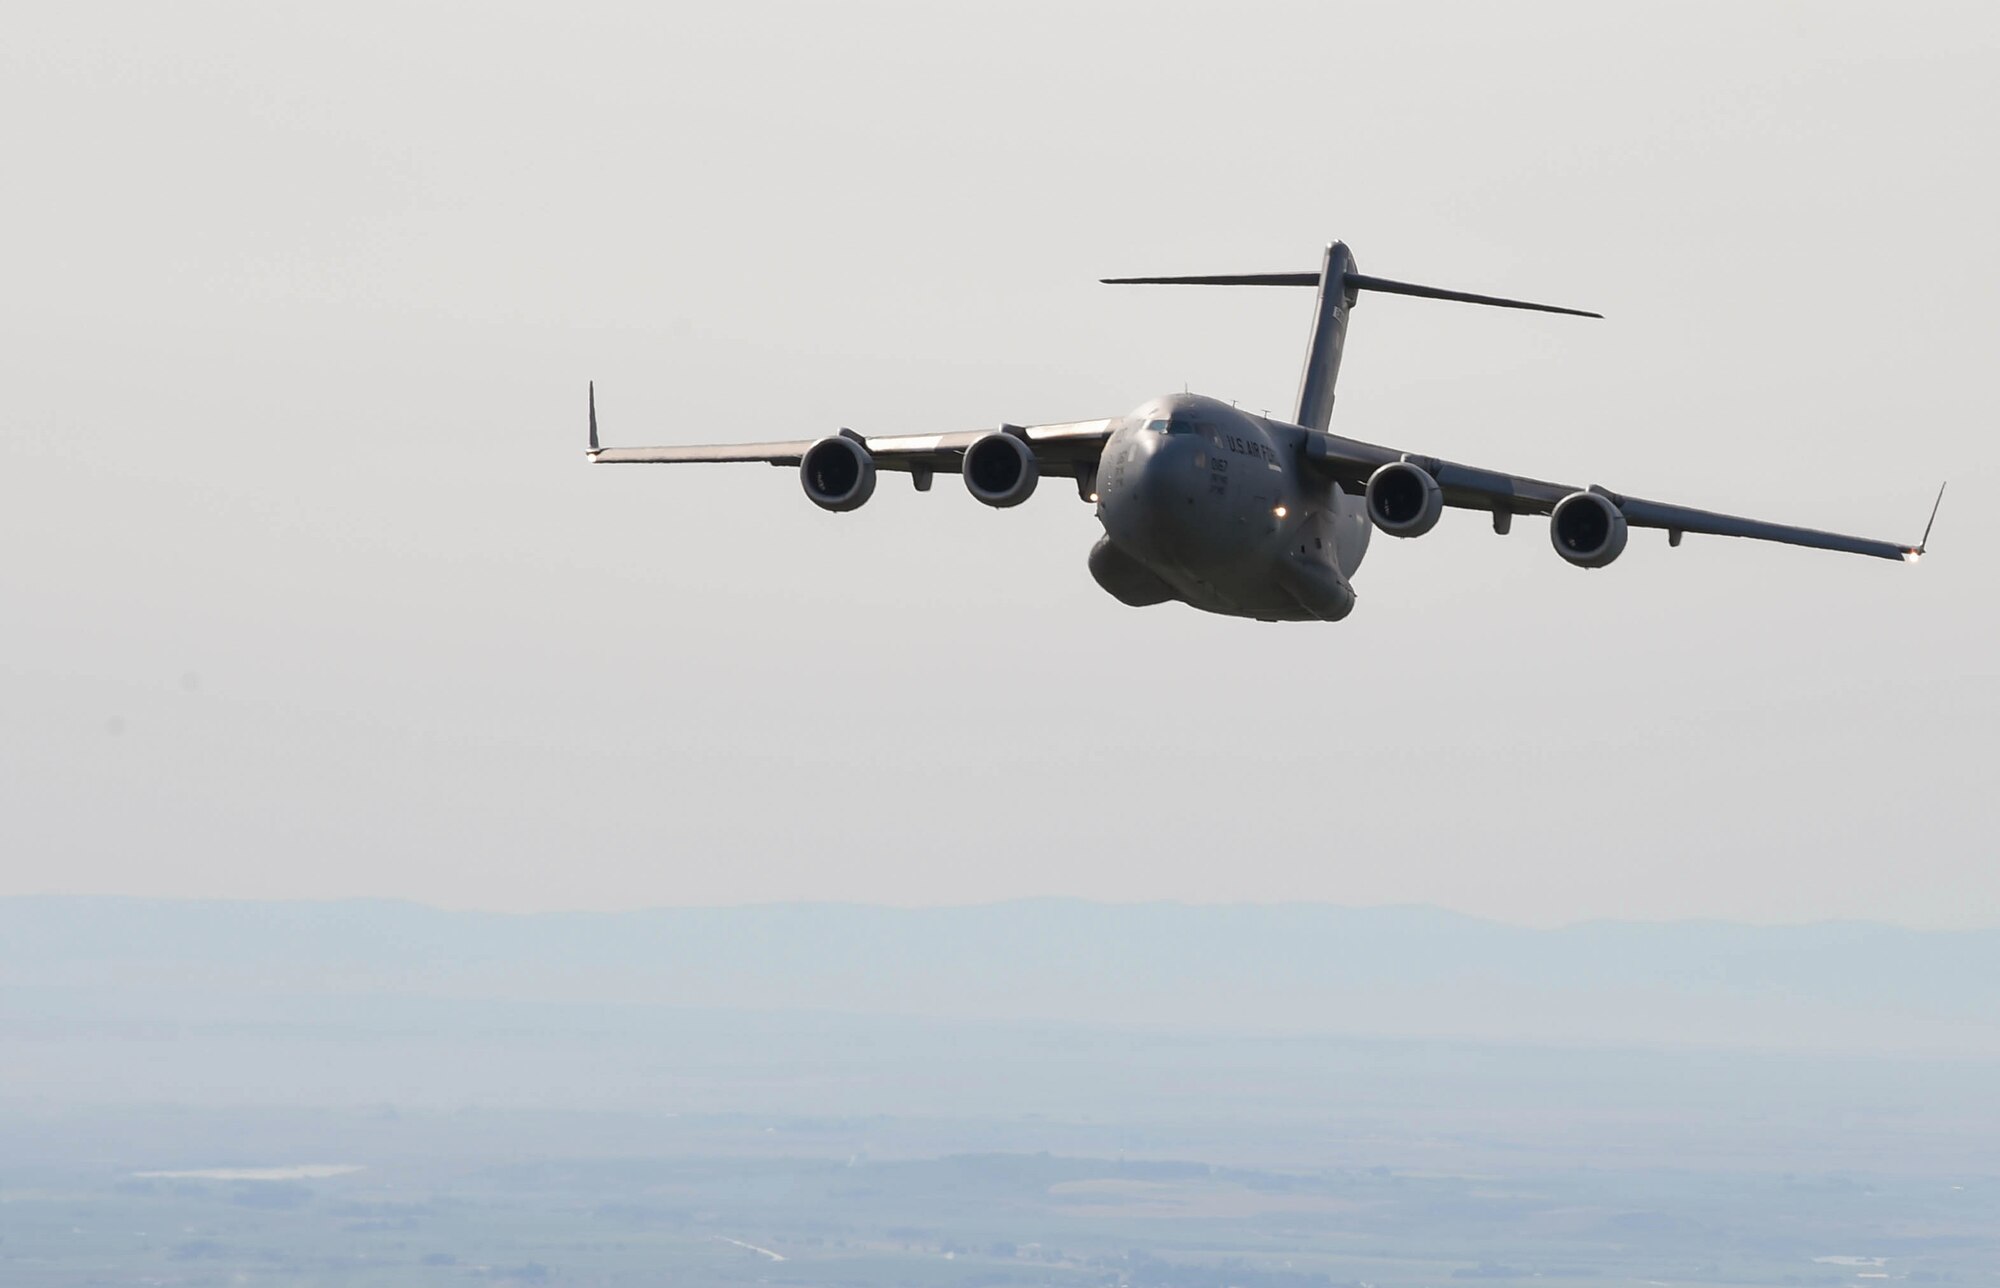 A C-17 Globemaster III flies during Exercise Rainier War to perform container delivery system bundle airdrops near Moses Lake, Wash., June 6, 2018. During the exercise, 20 C-17s from the U.S. and Australia performed actual container delivery system (CDS) and heavy equipment airdrops at the Rainier Drop Zone near Moses Lake, and simulated improved CDS, CDS and high altitude low opening personnel airdrops throughout the western United States. (U.S. Air Force photo by Senior Airman Tryphena Mayhugh)